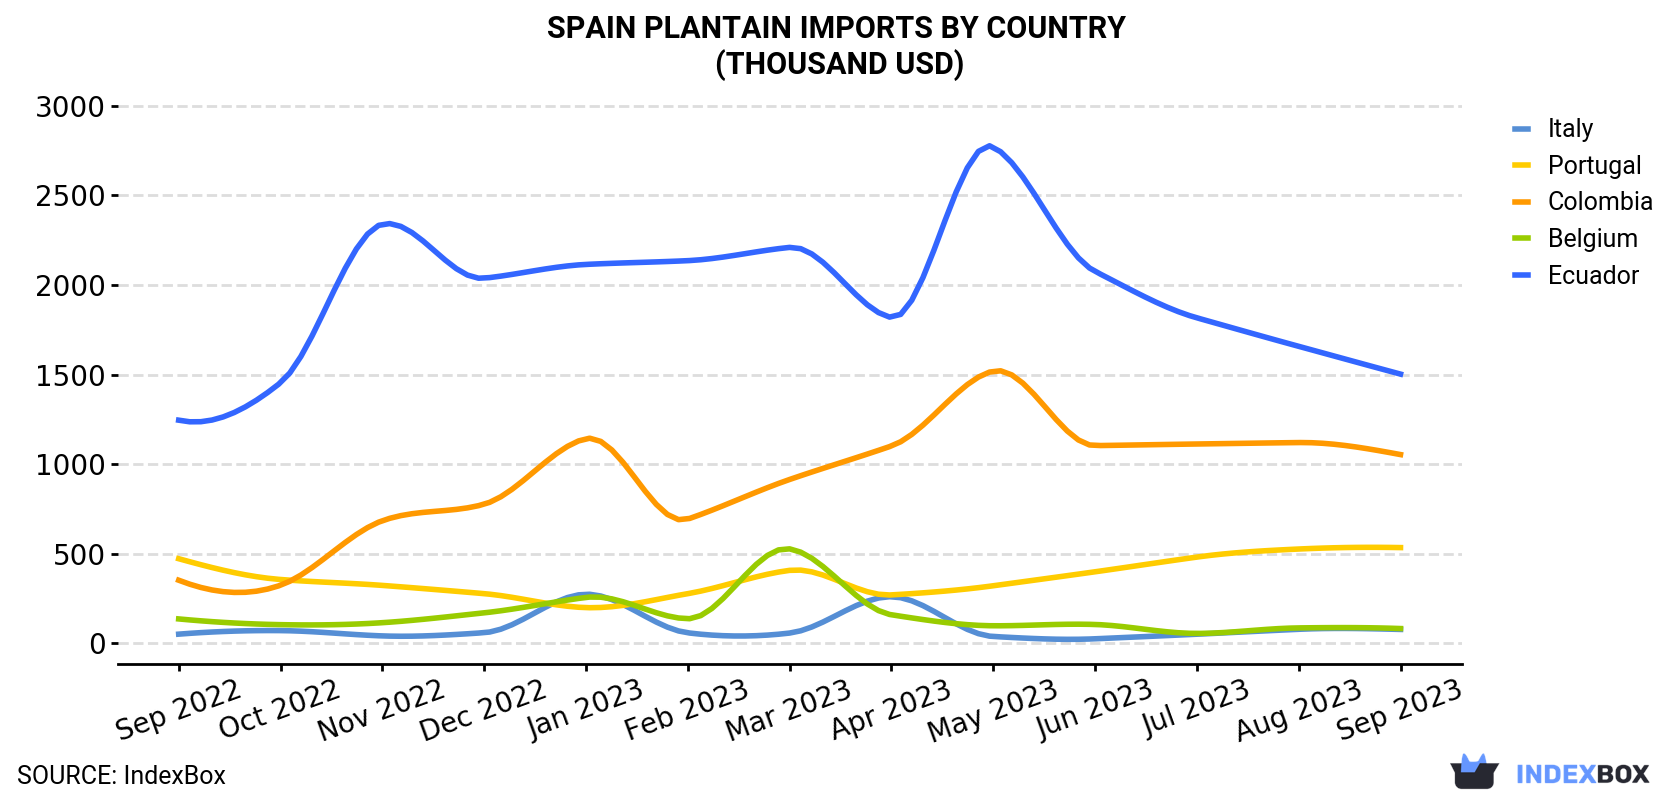 Spain Plantain Imports By Country (Thousand USD)